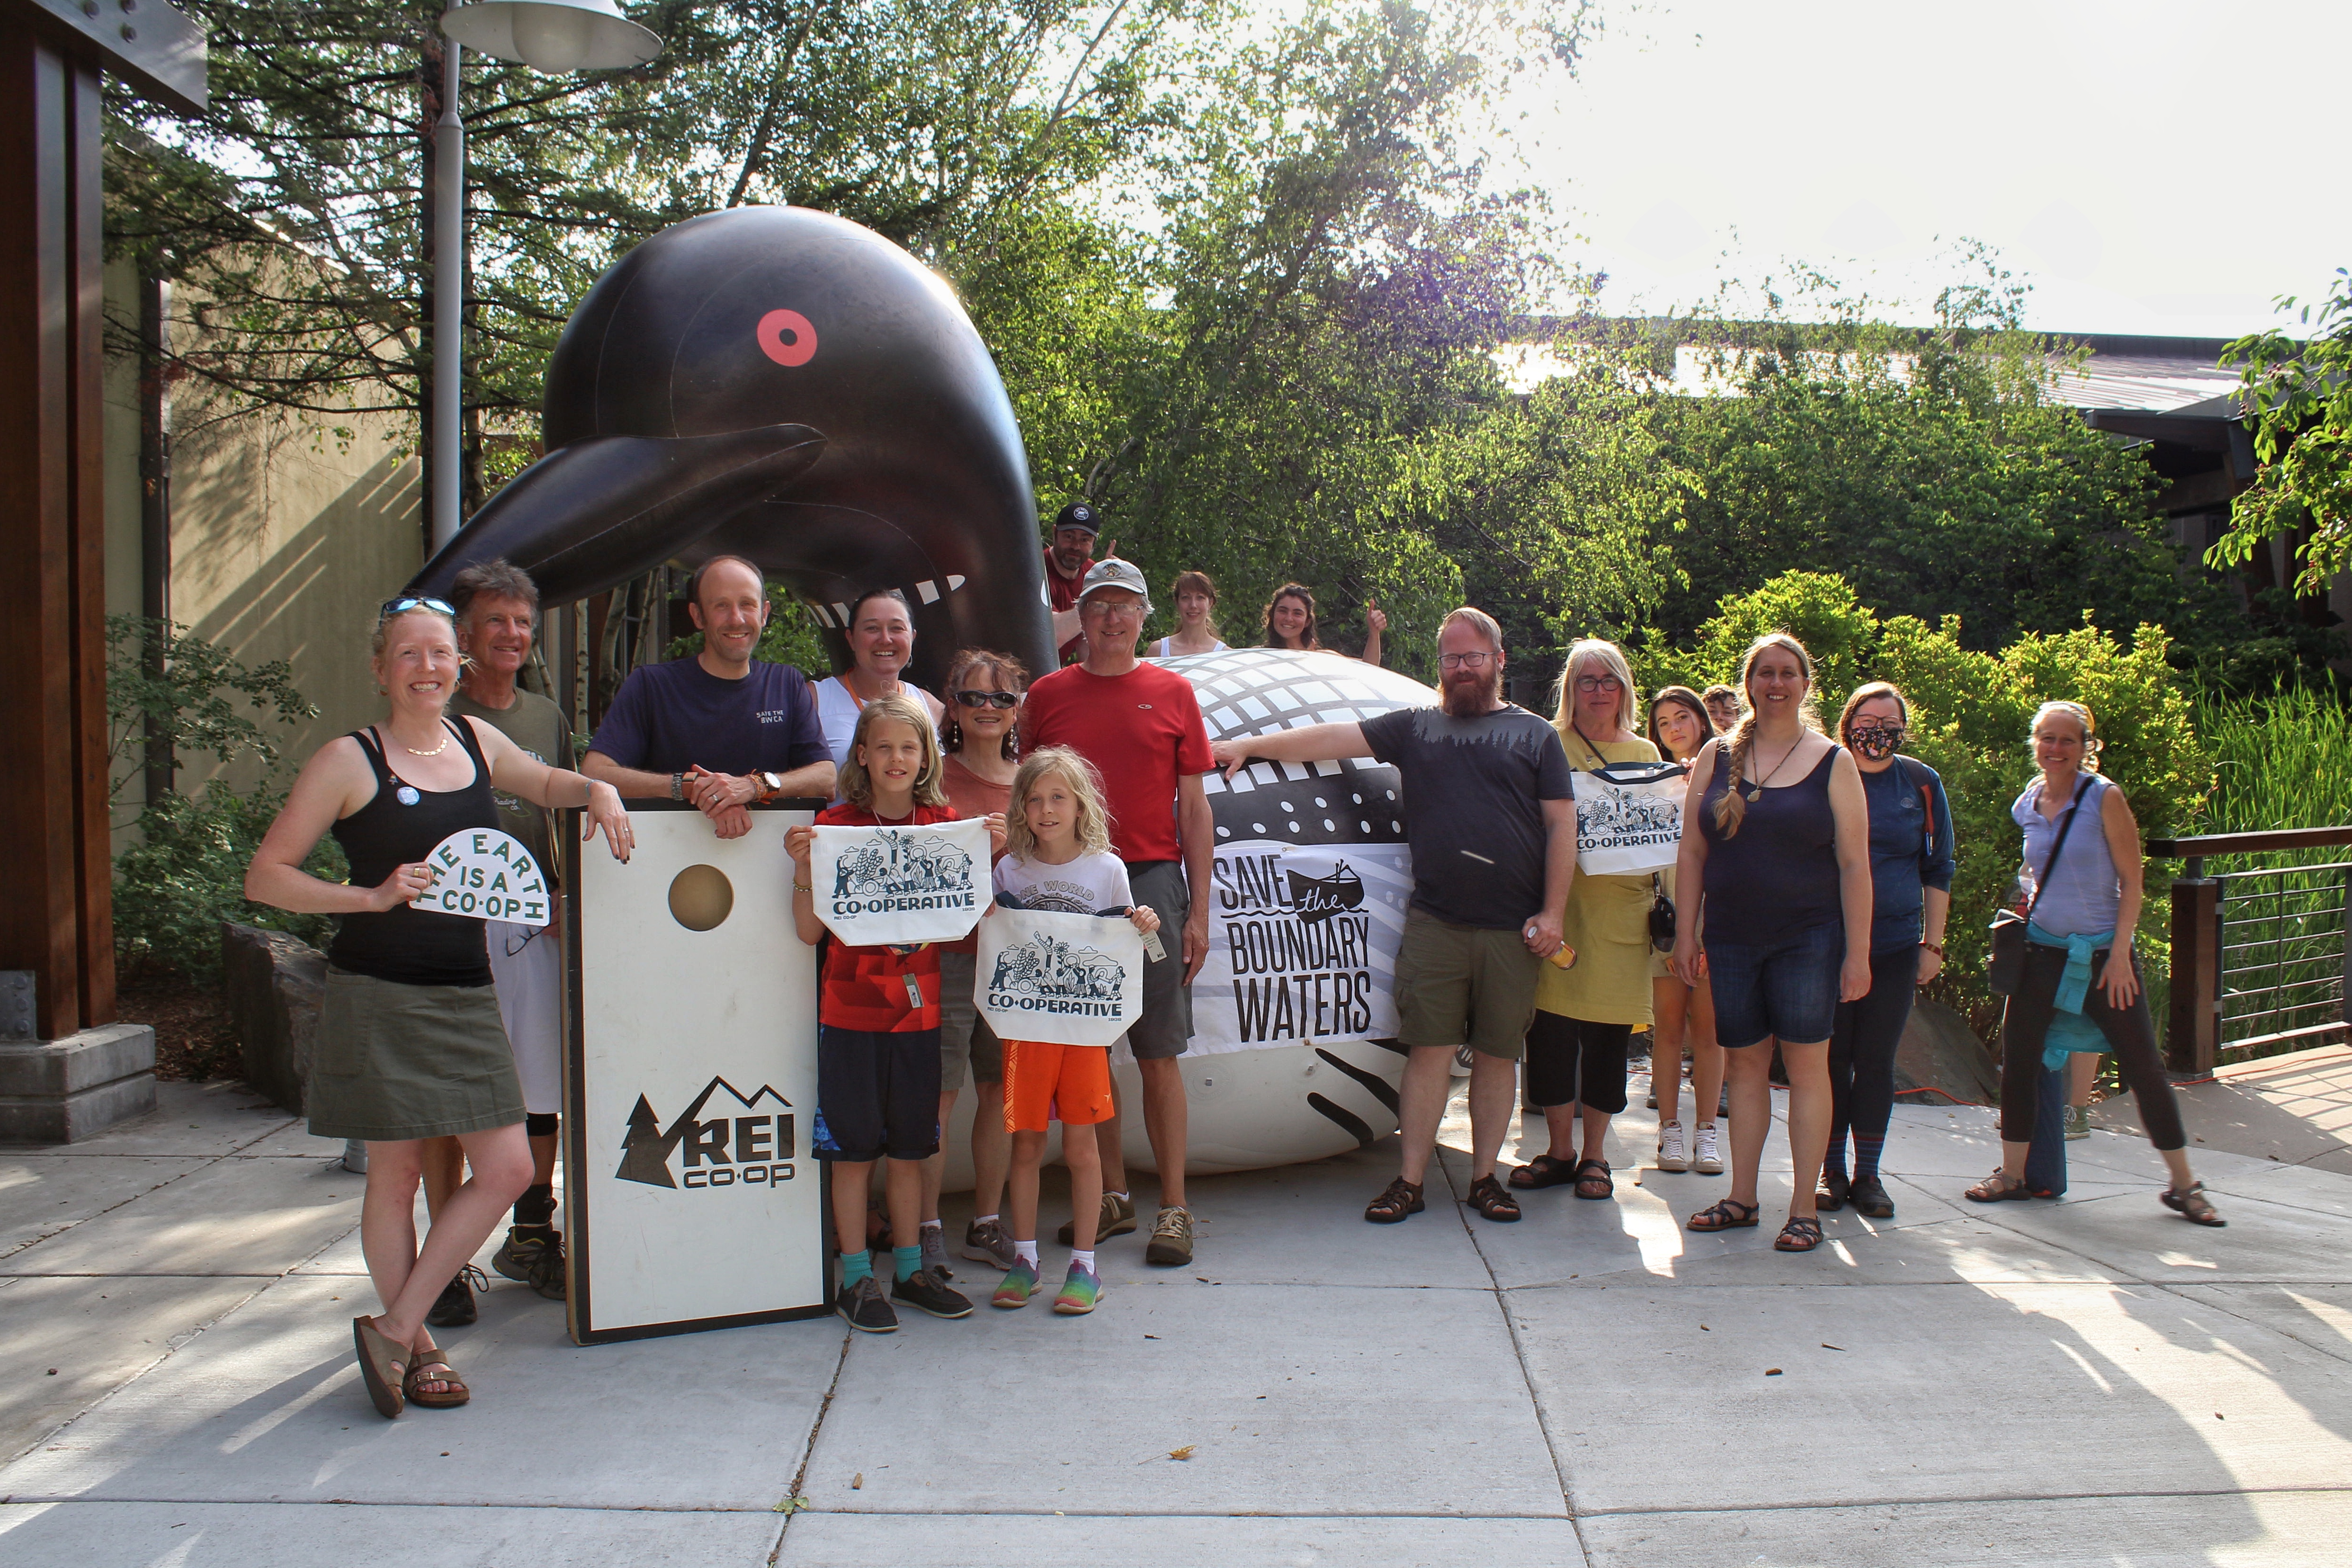 Supporters pose in front of an inflatable loon at the REI Co-op Wilderness Action Day